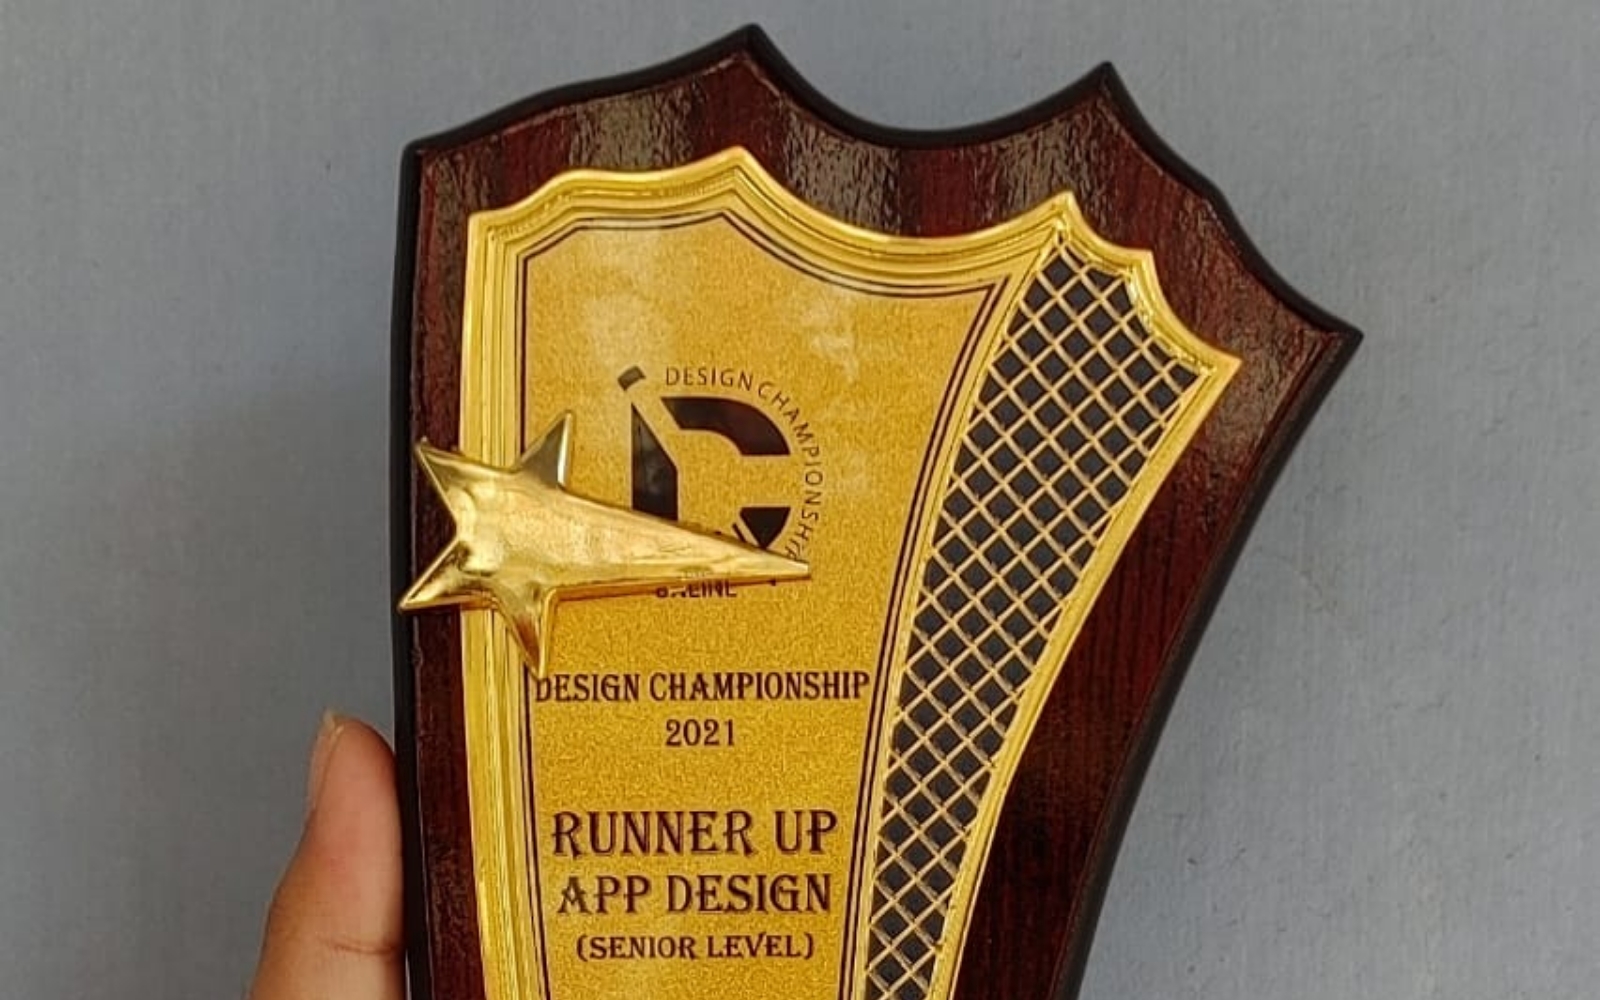 Aritra Neogi has won Runner Up trophy in Design Championship India 2021